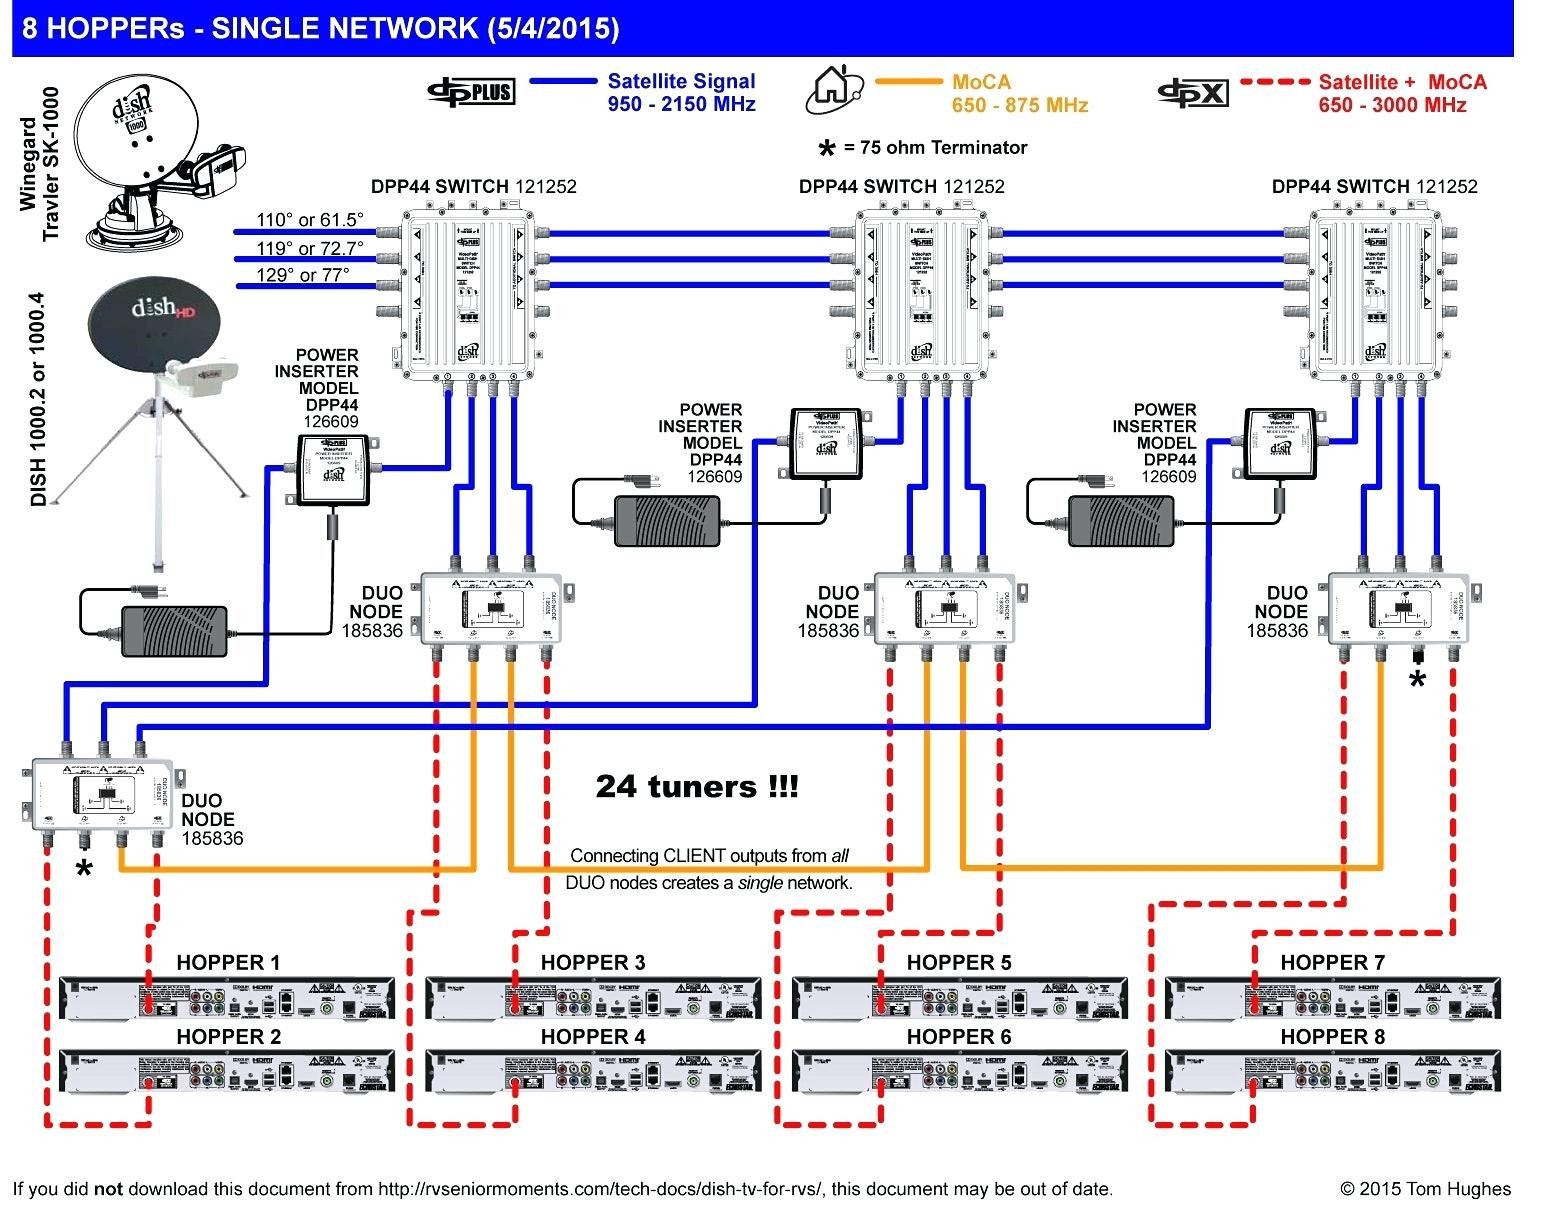 Dish Network Wiring Diagram Td | Wiring Library - Dish Network Satellite Wiring Diagram